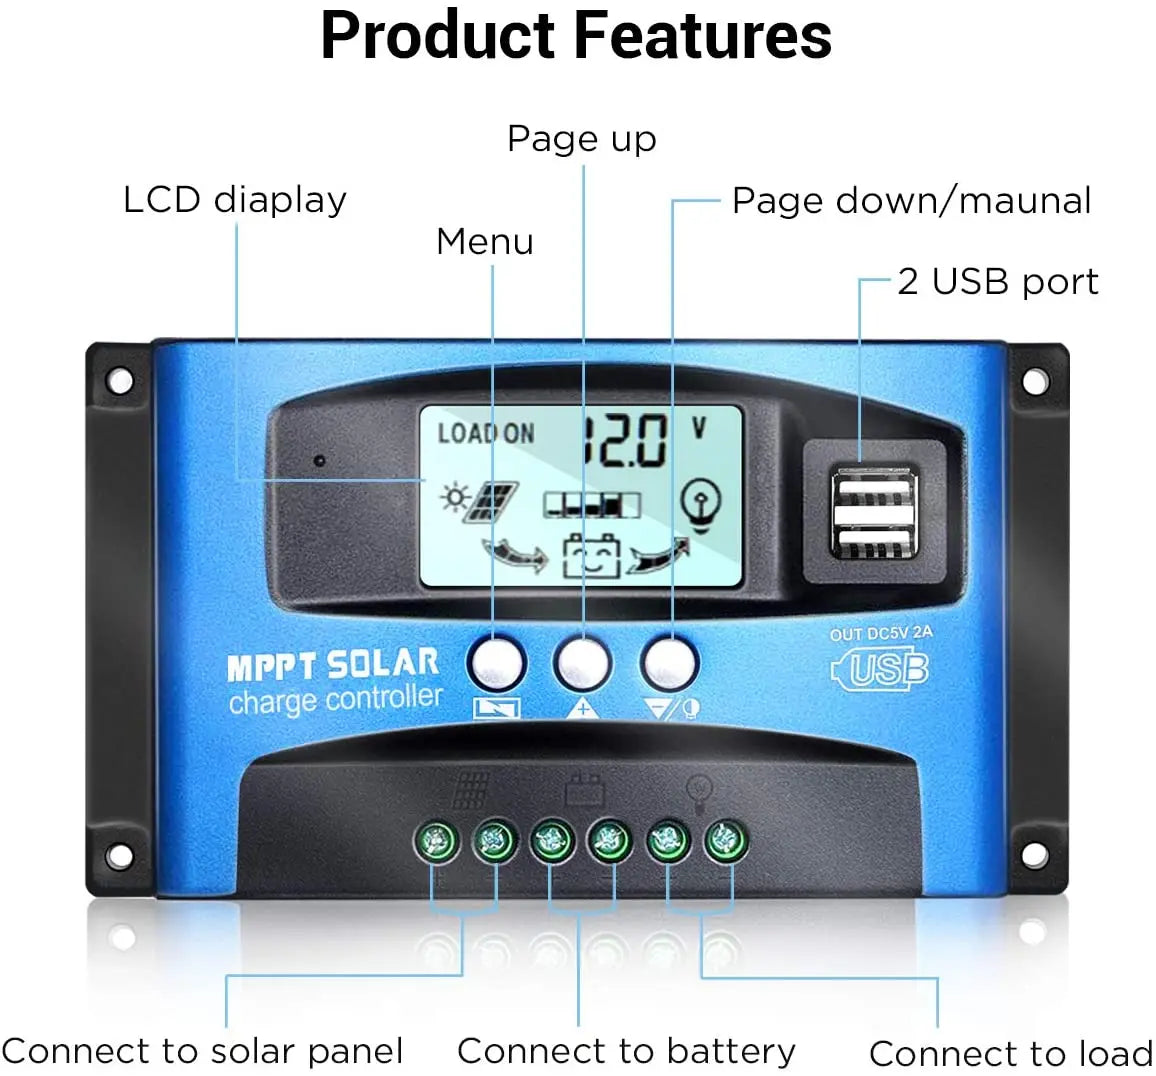 40A 50A 60A 100A MPPT Solar Charge Controller, LCD display, menu nav, USB ports, and efficient charging features.